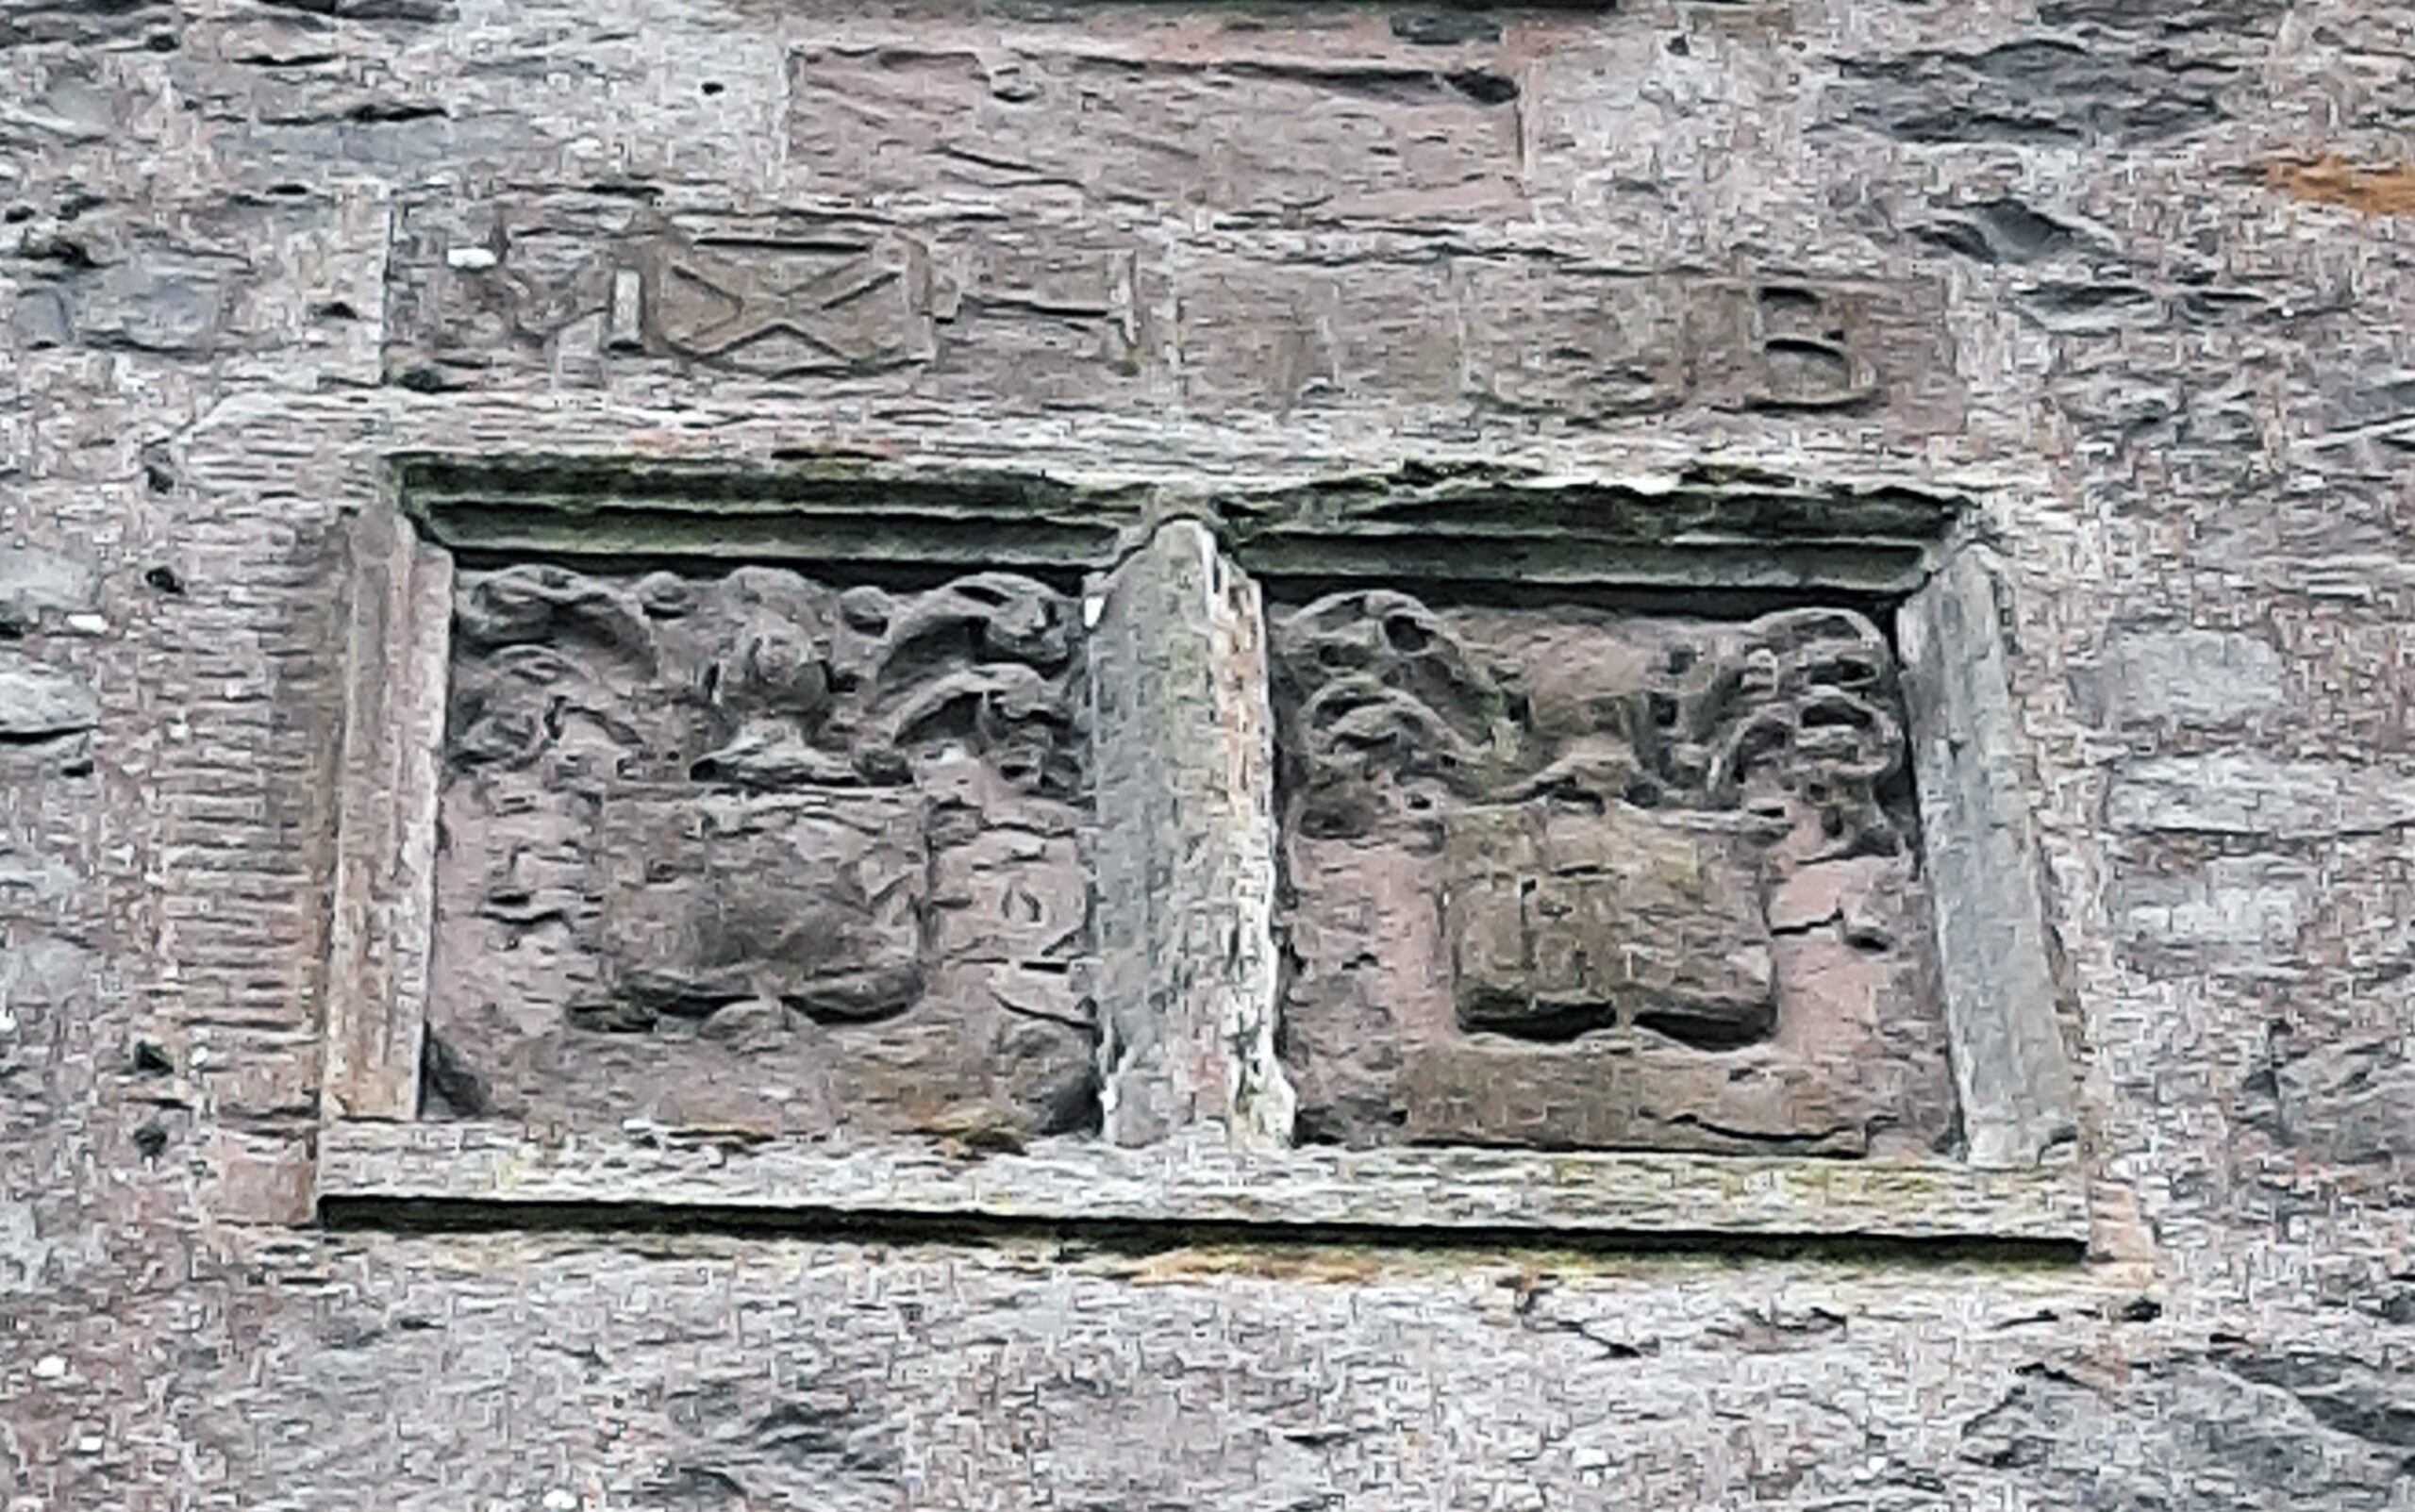 Tayport Heritage Trail - Board 23 - Margaret Hartsyde & Sir John Buchanan- Coats of Arms on steeple and also of their son-in-law Sir Arthur Erskine and his wife Margaret Buchanan (circa 1646)